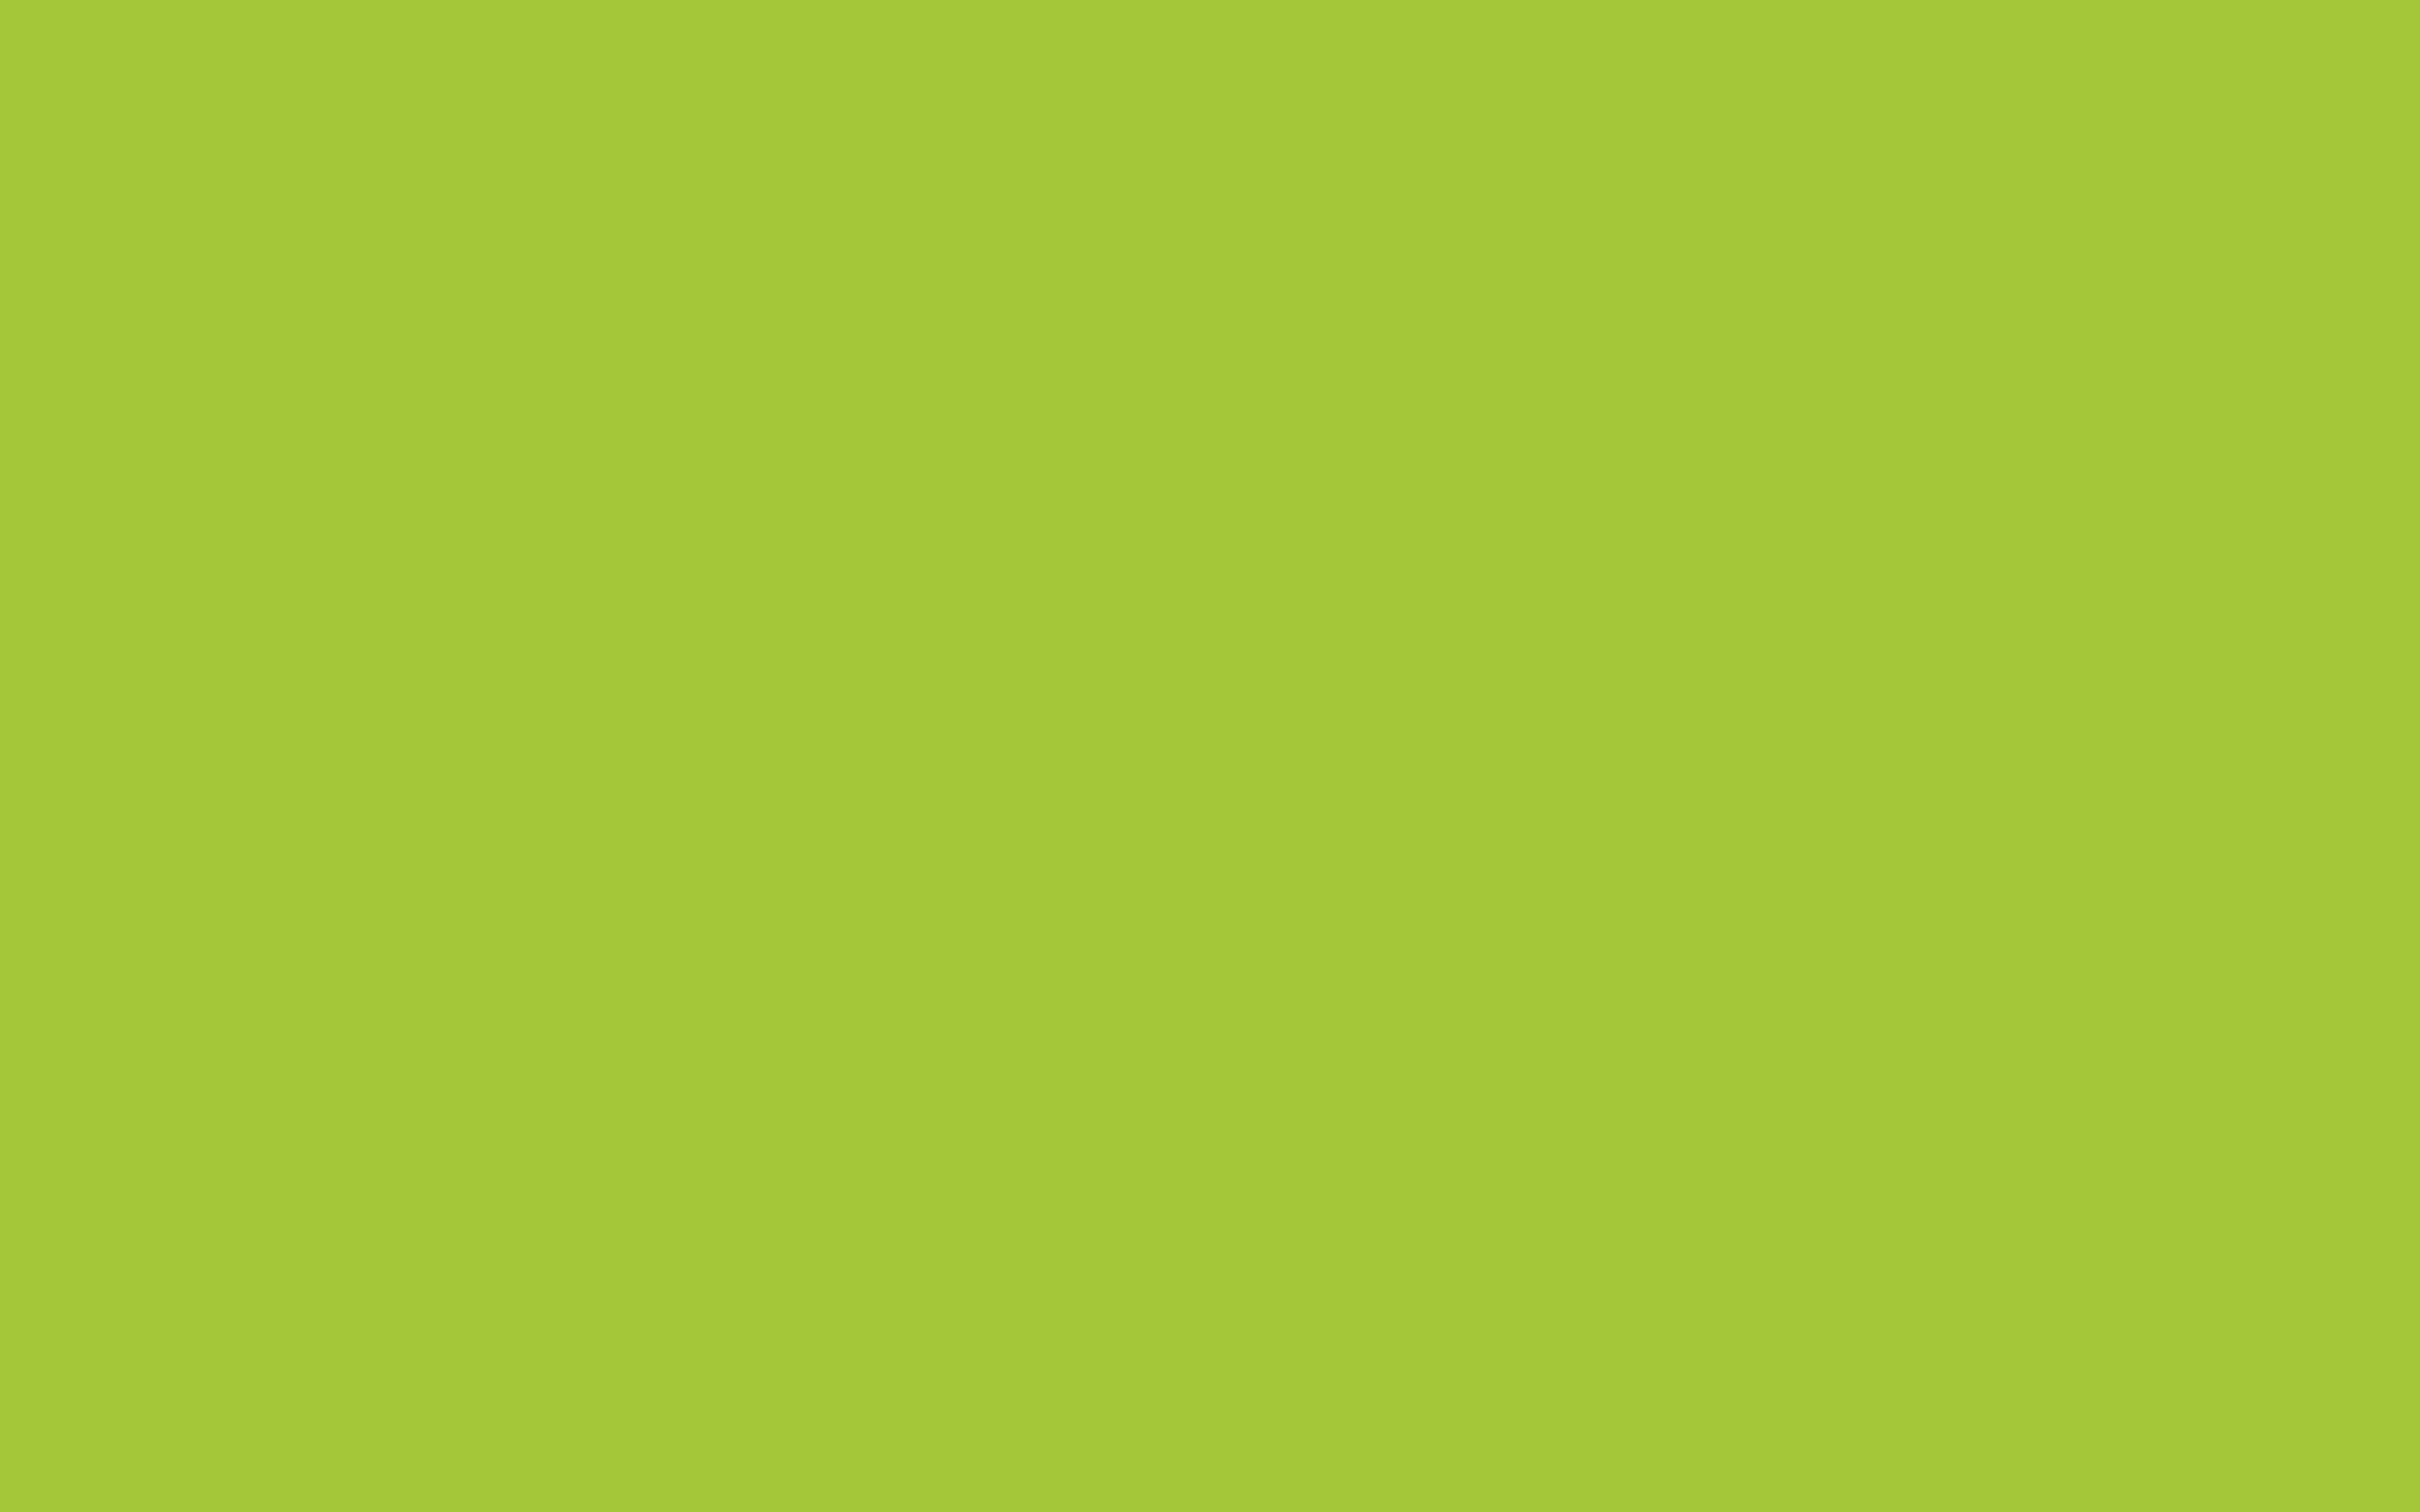 Android Green Solid Color Background Wallpaper